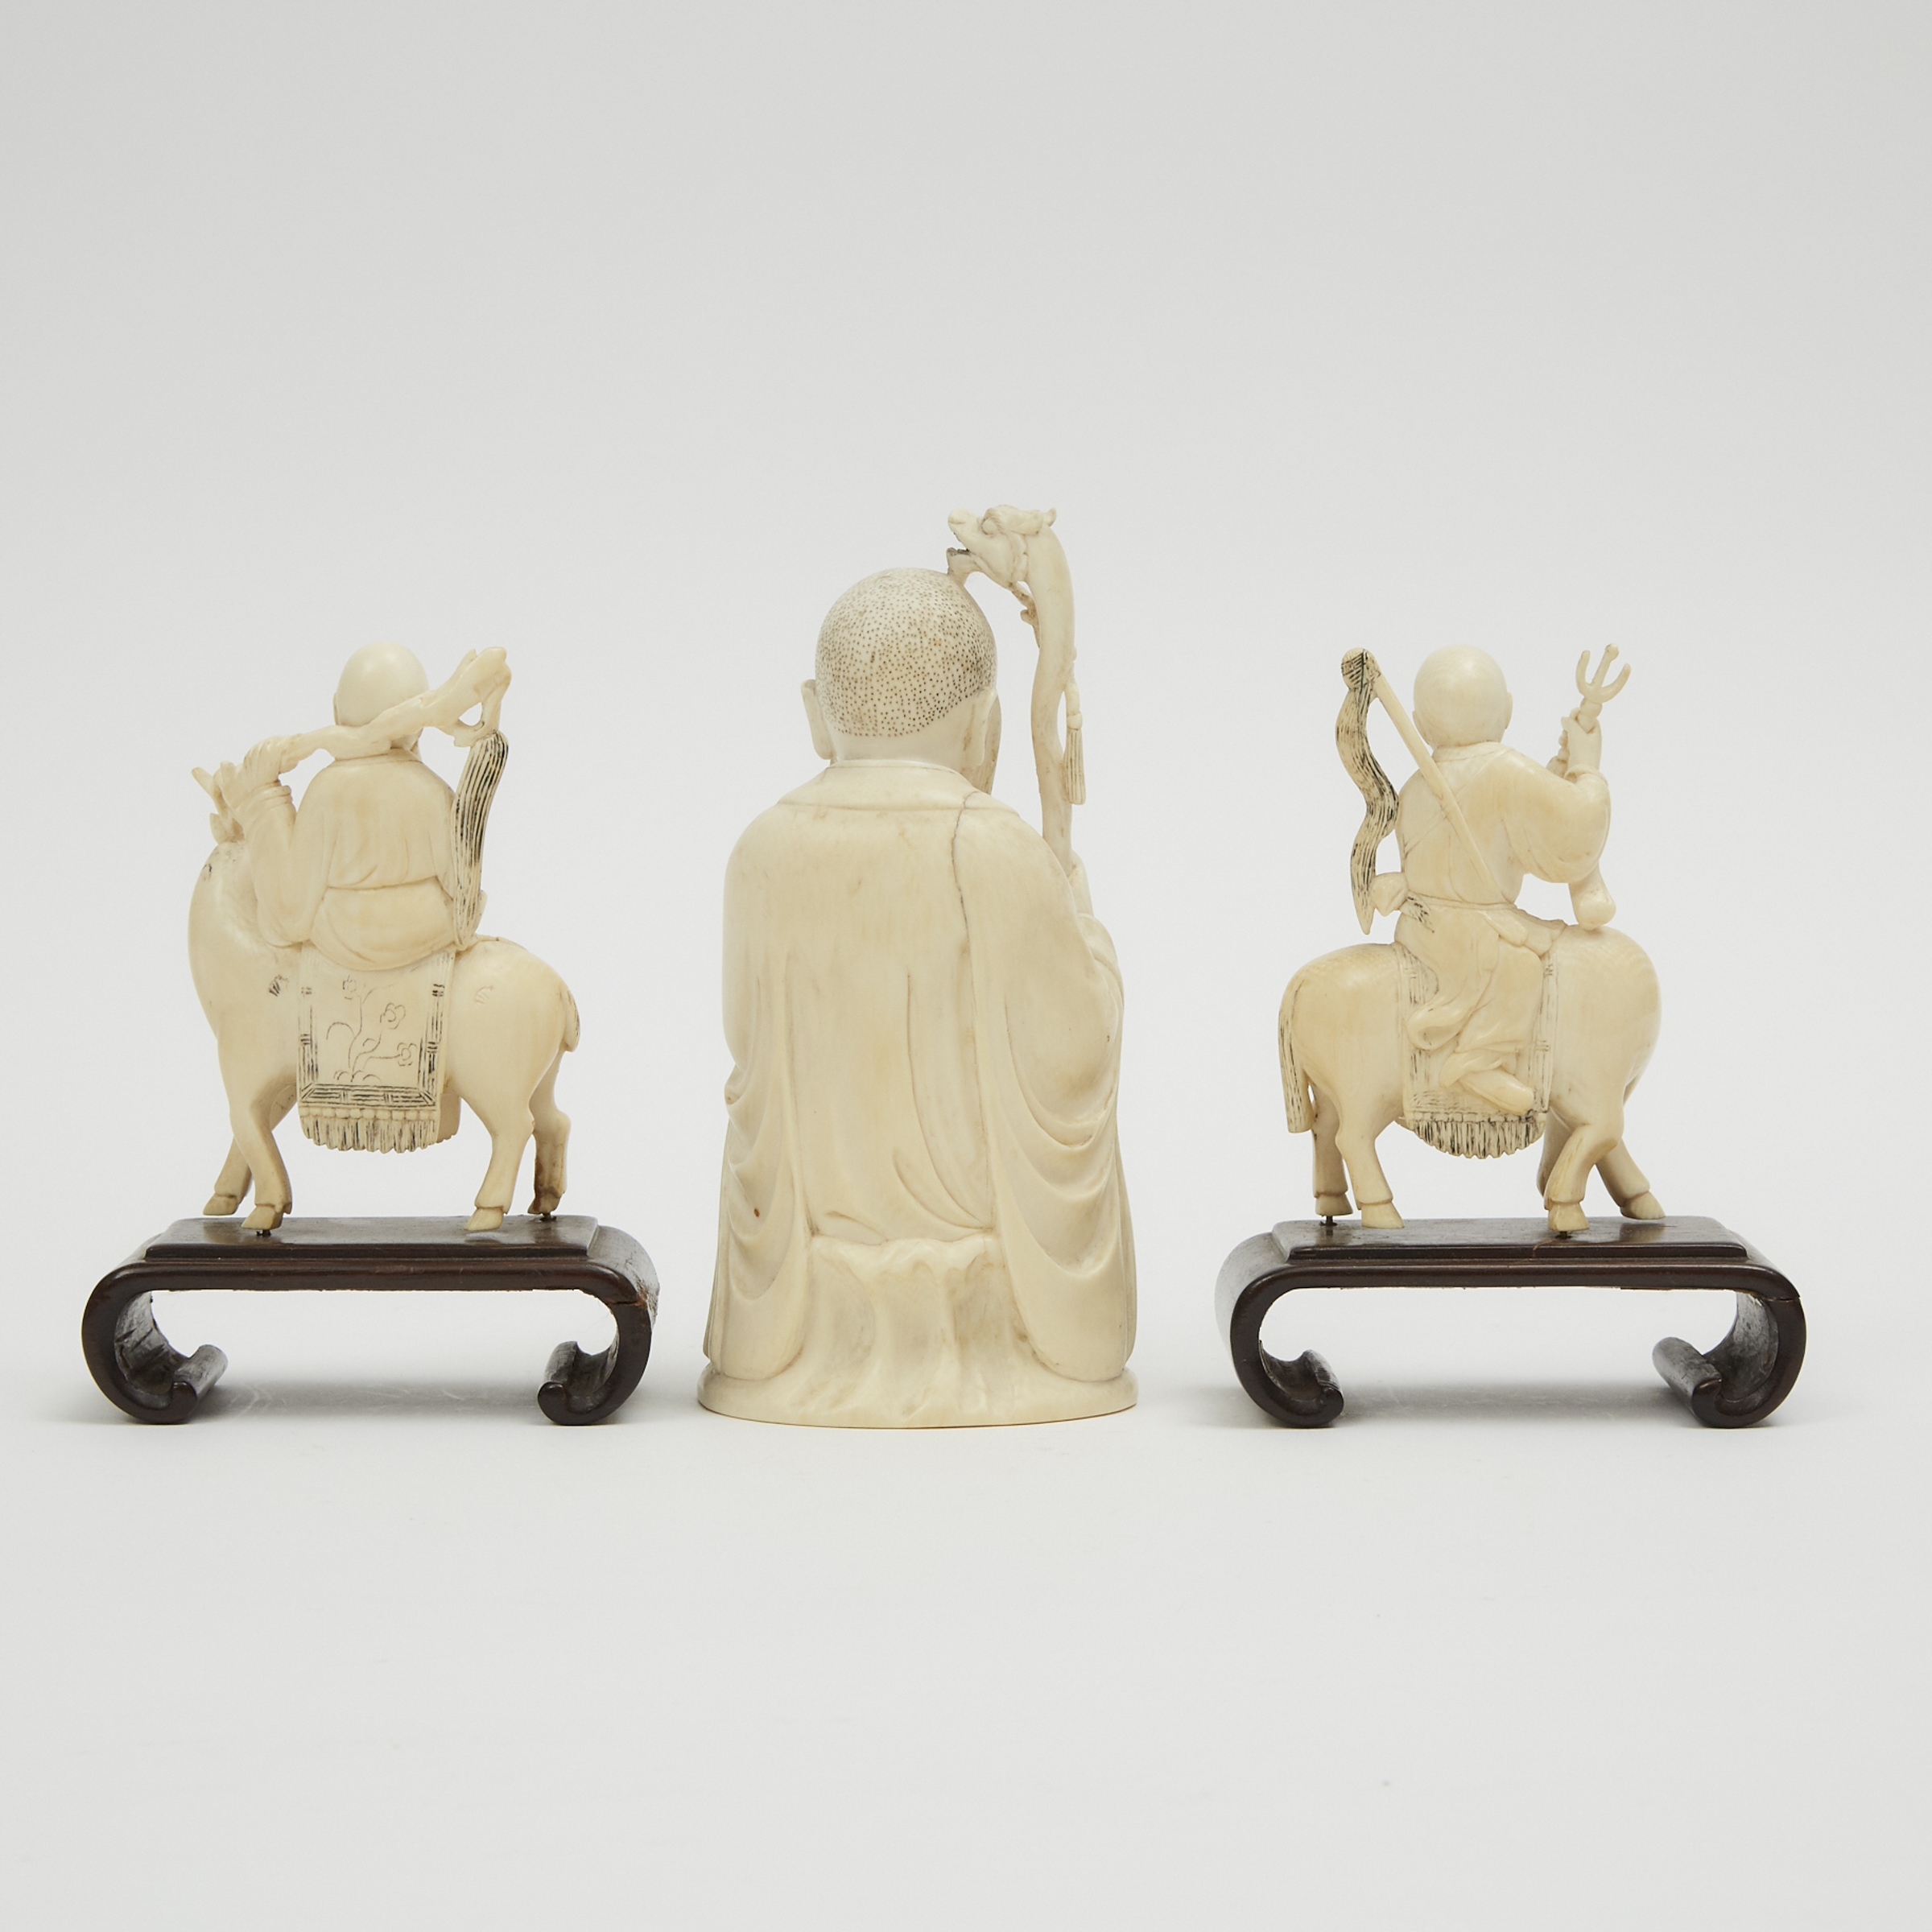 A Group of Three Chinese Ivory Carved 'Luohan' Figures, Early 20th Century